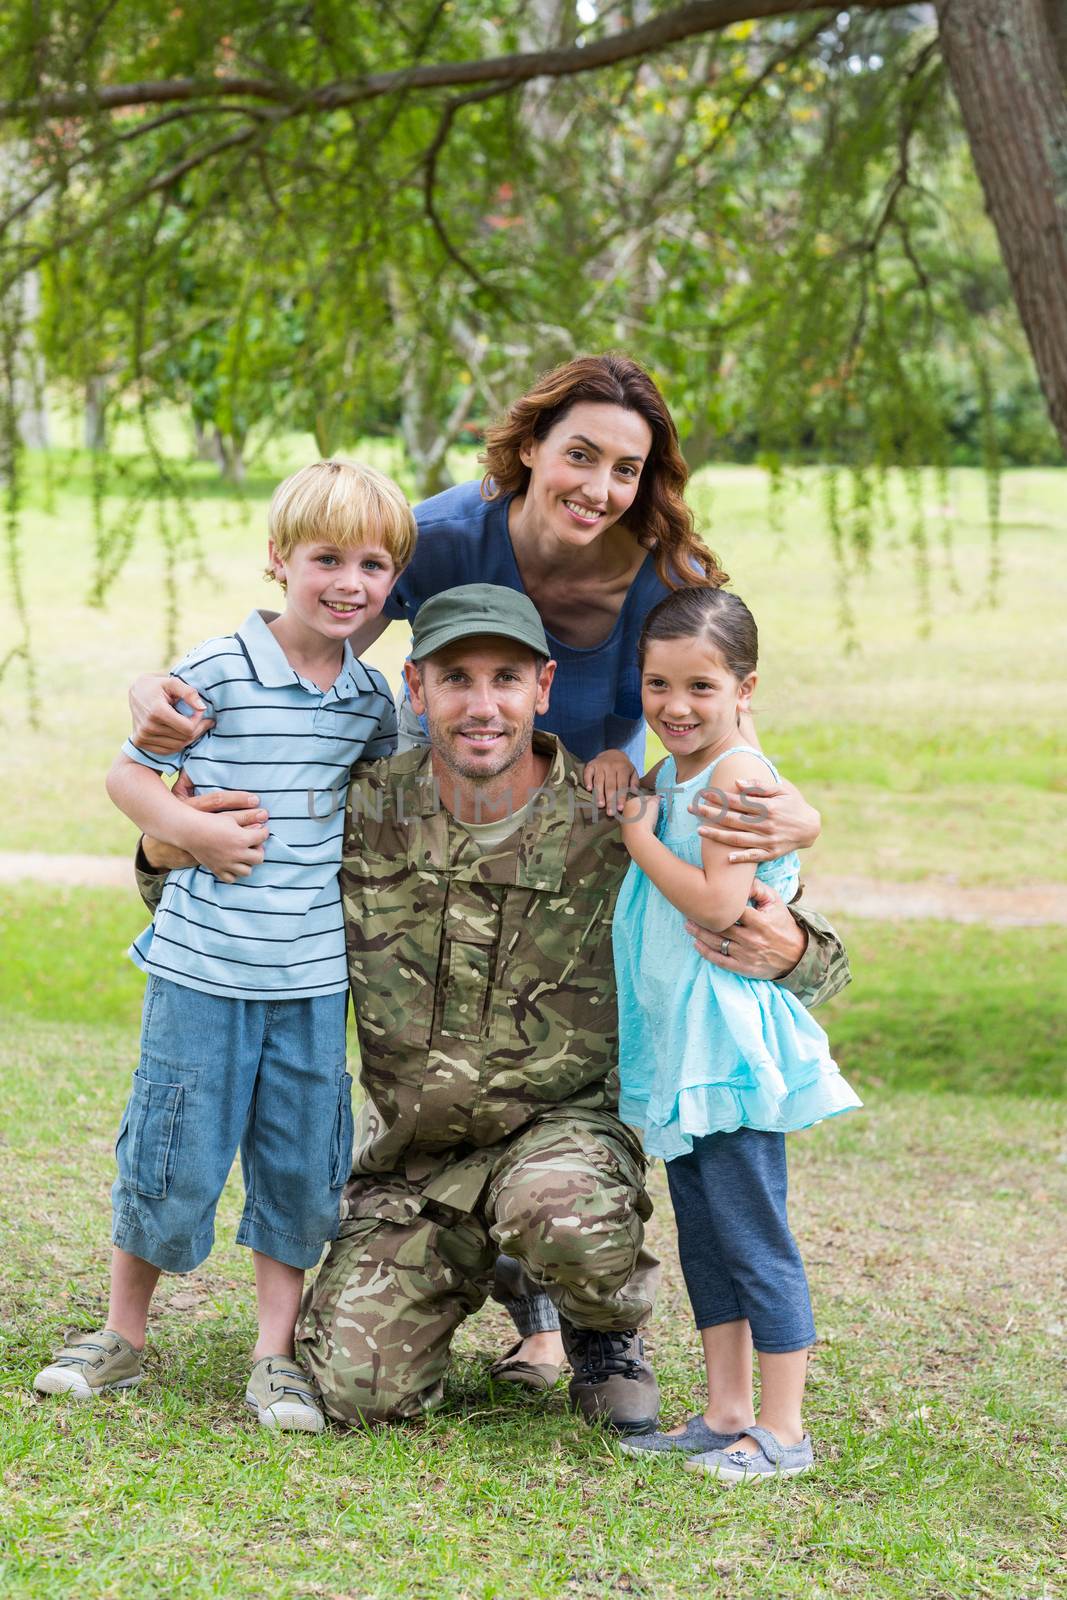 Handsome soldier reunited with family  by Wavebreakmedia